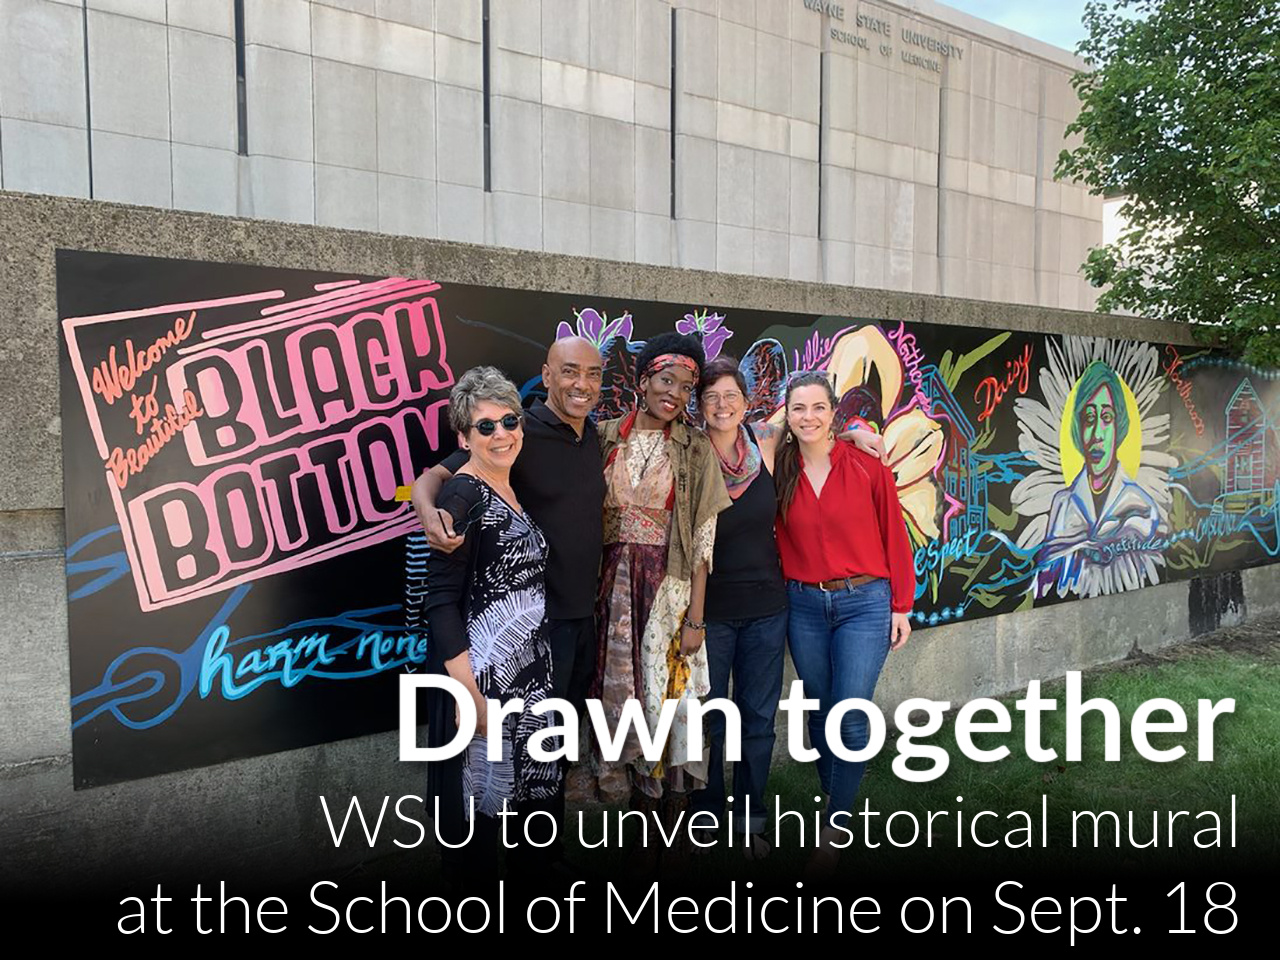 Wayne State University to to unveil historical mural at the School of Medicine Sept. 18